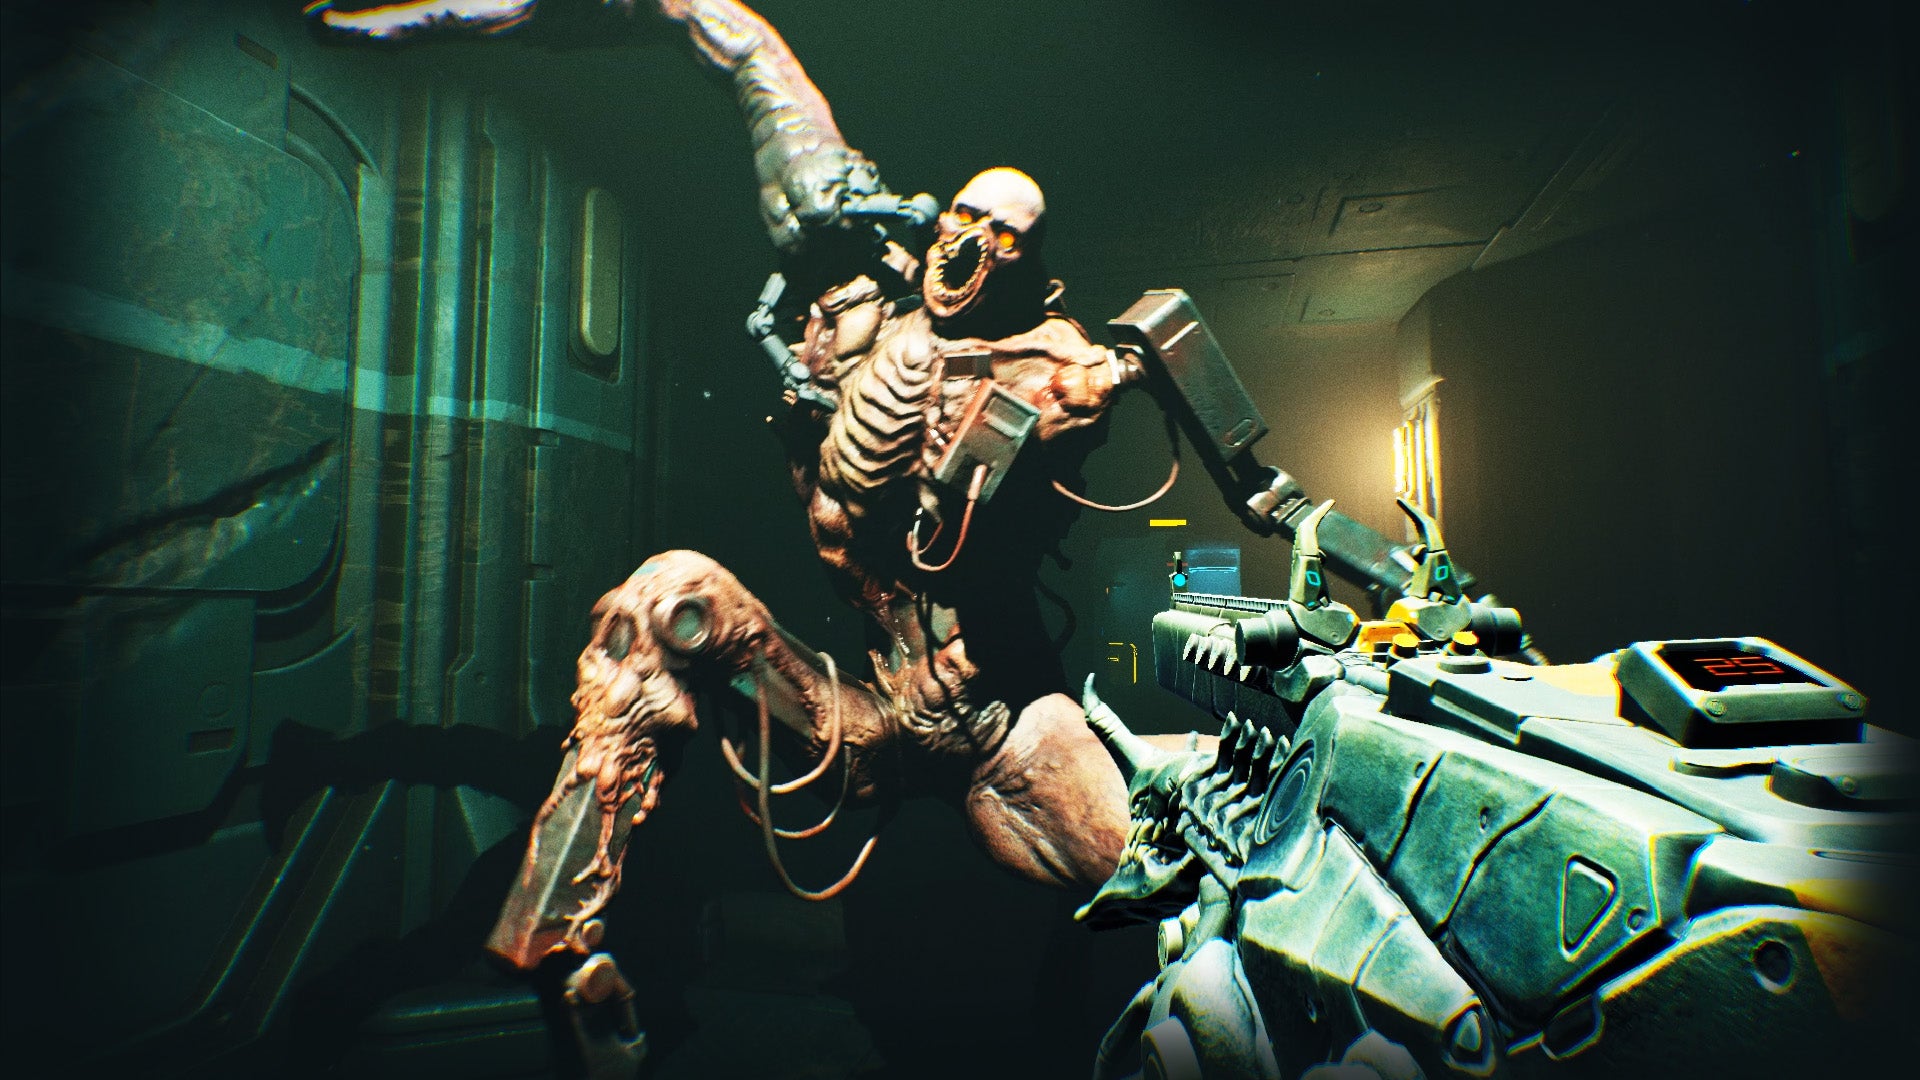 A mutant attacks the player in Ripout.